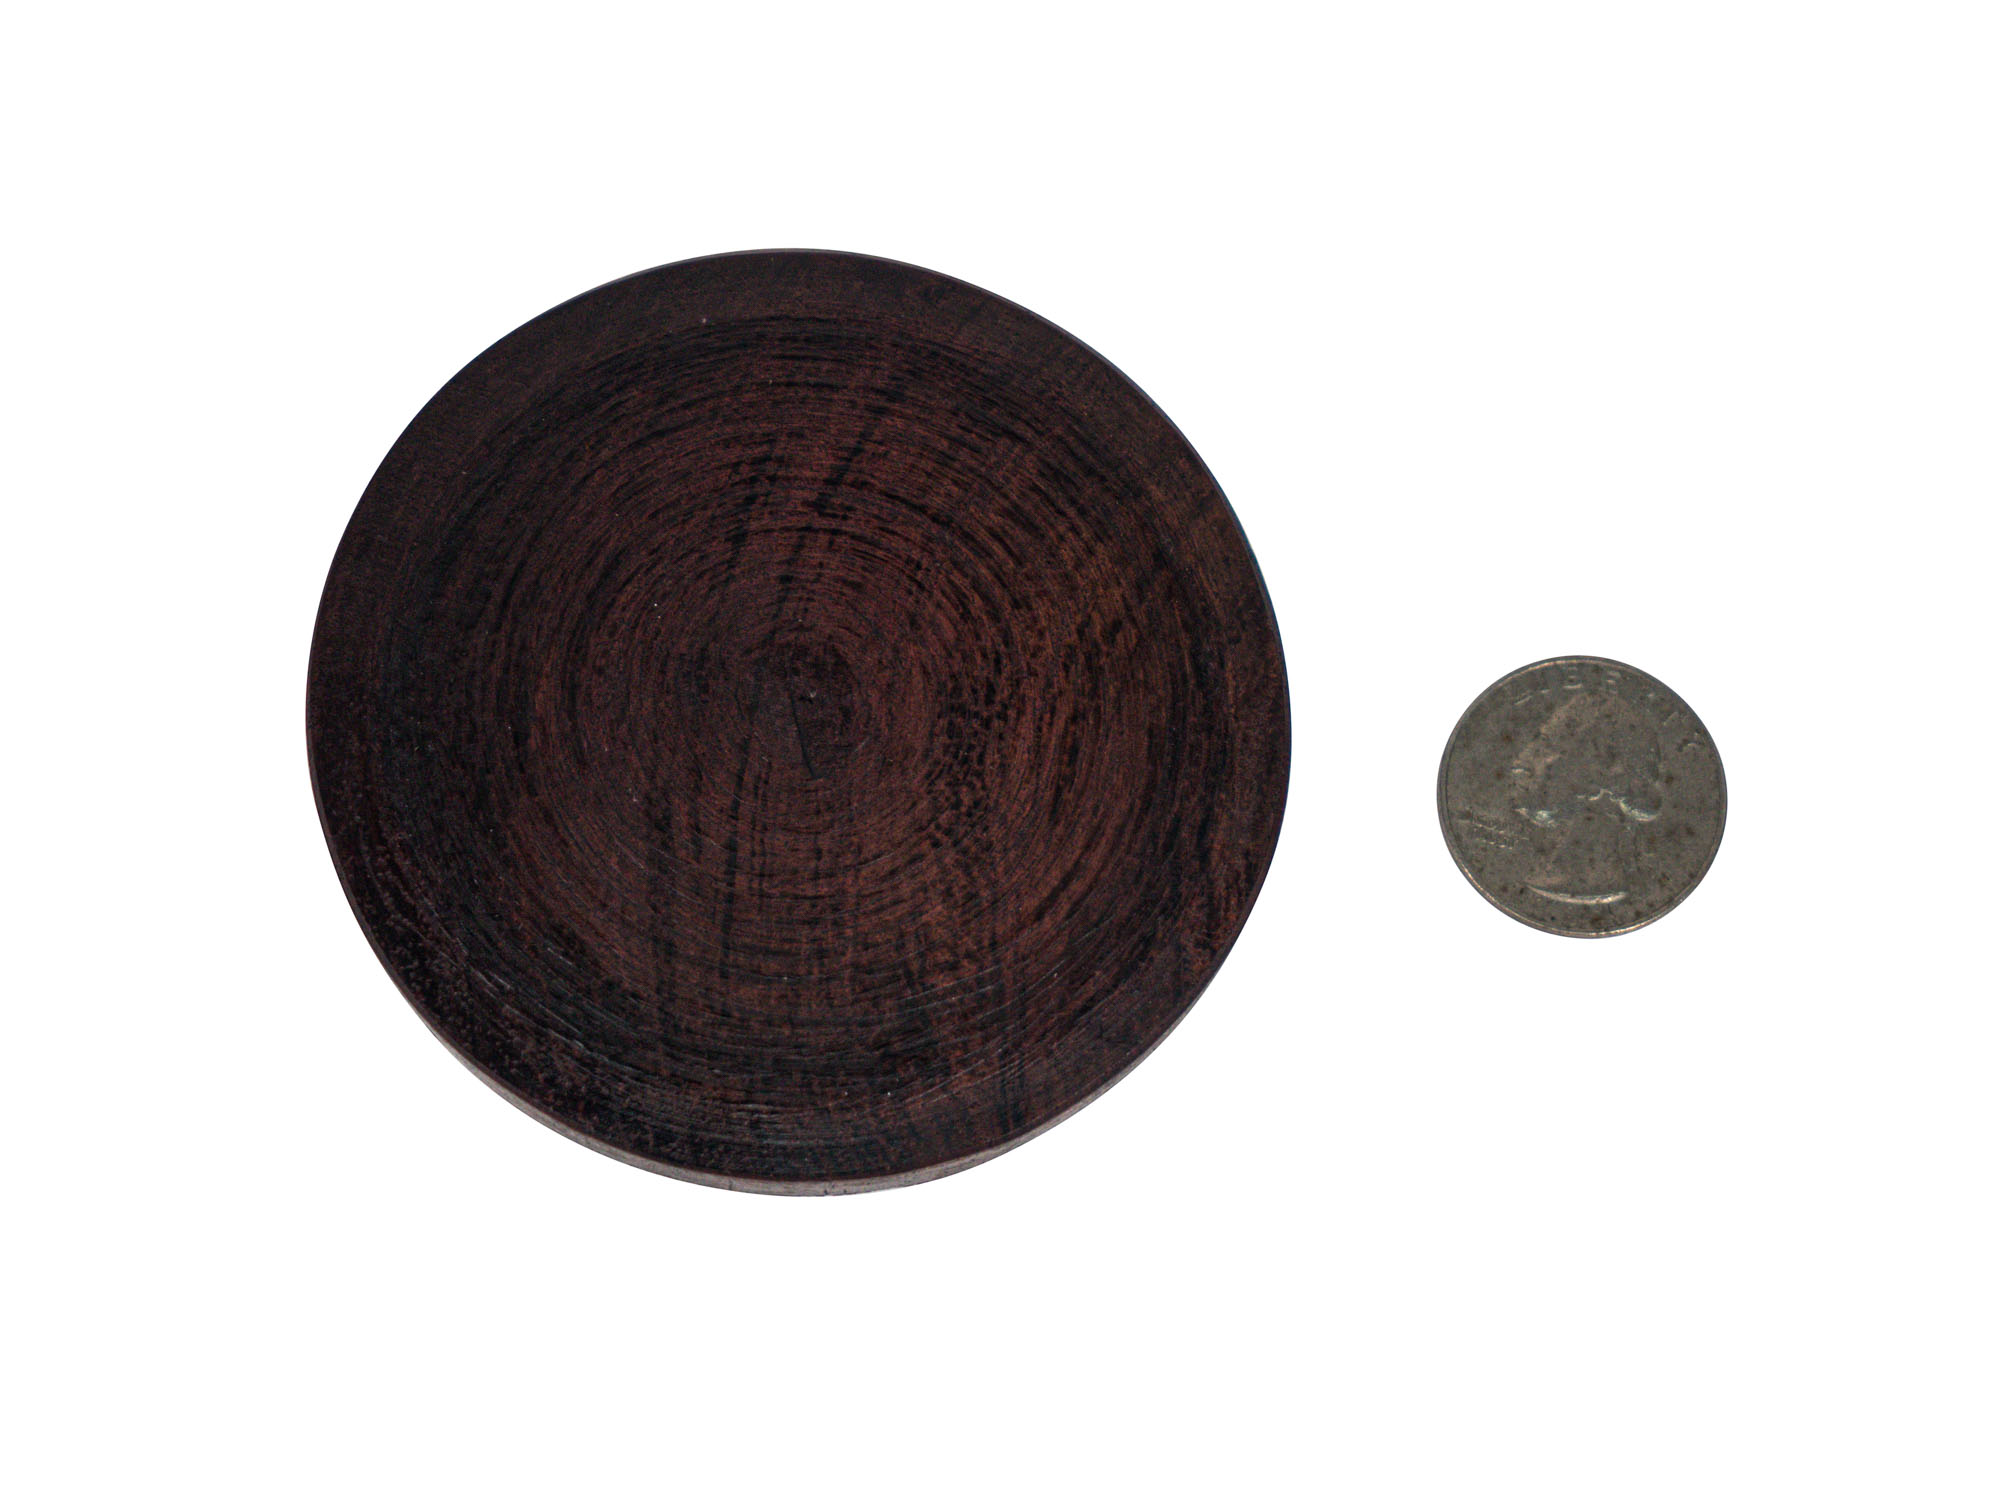 Elephant African Wood Coasters (set of 6): Gallery Item - 865-50-E-G4997 (Q4)